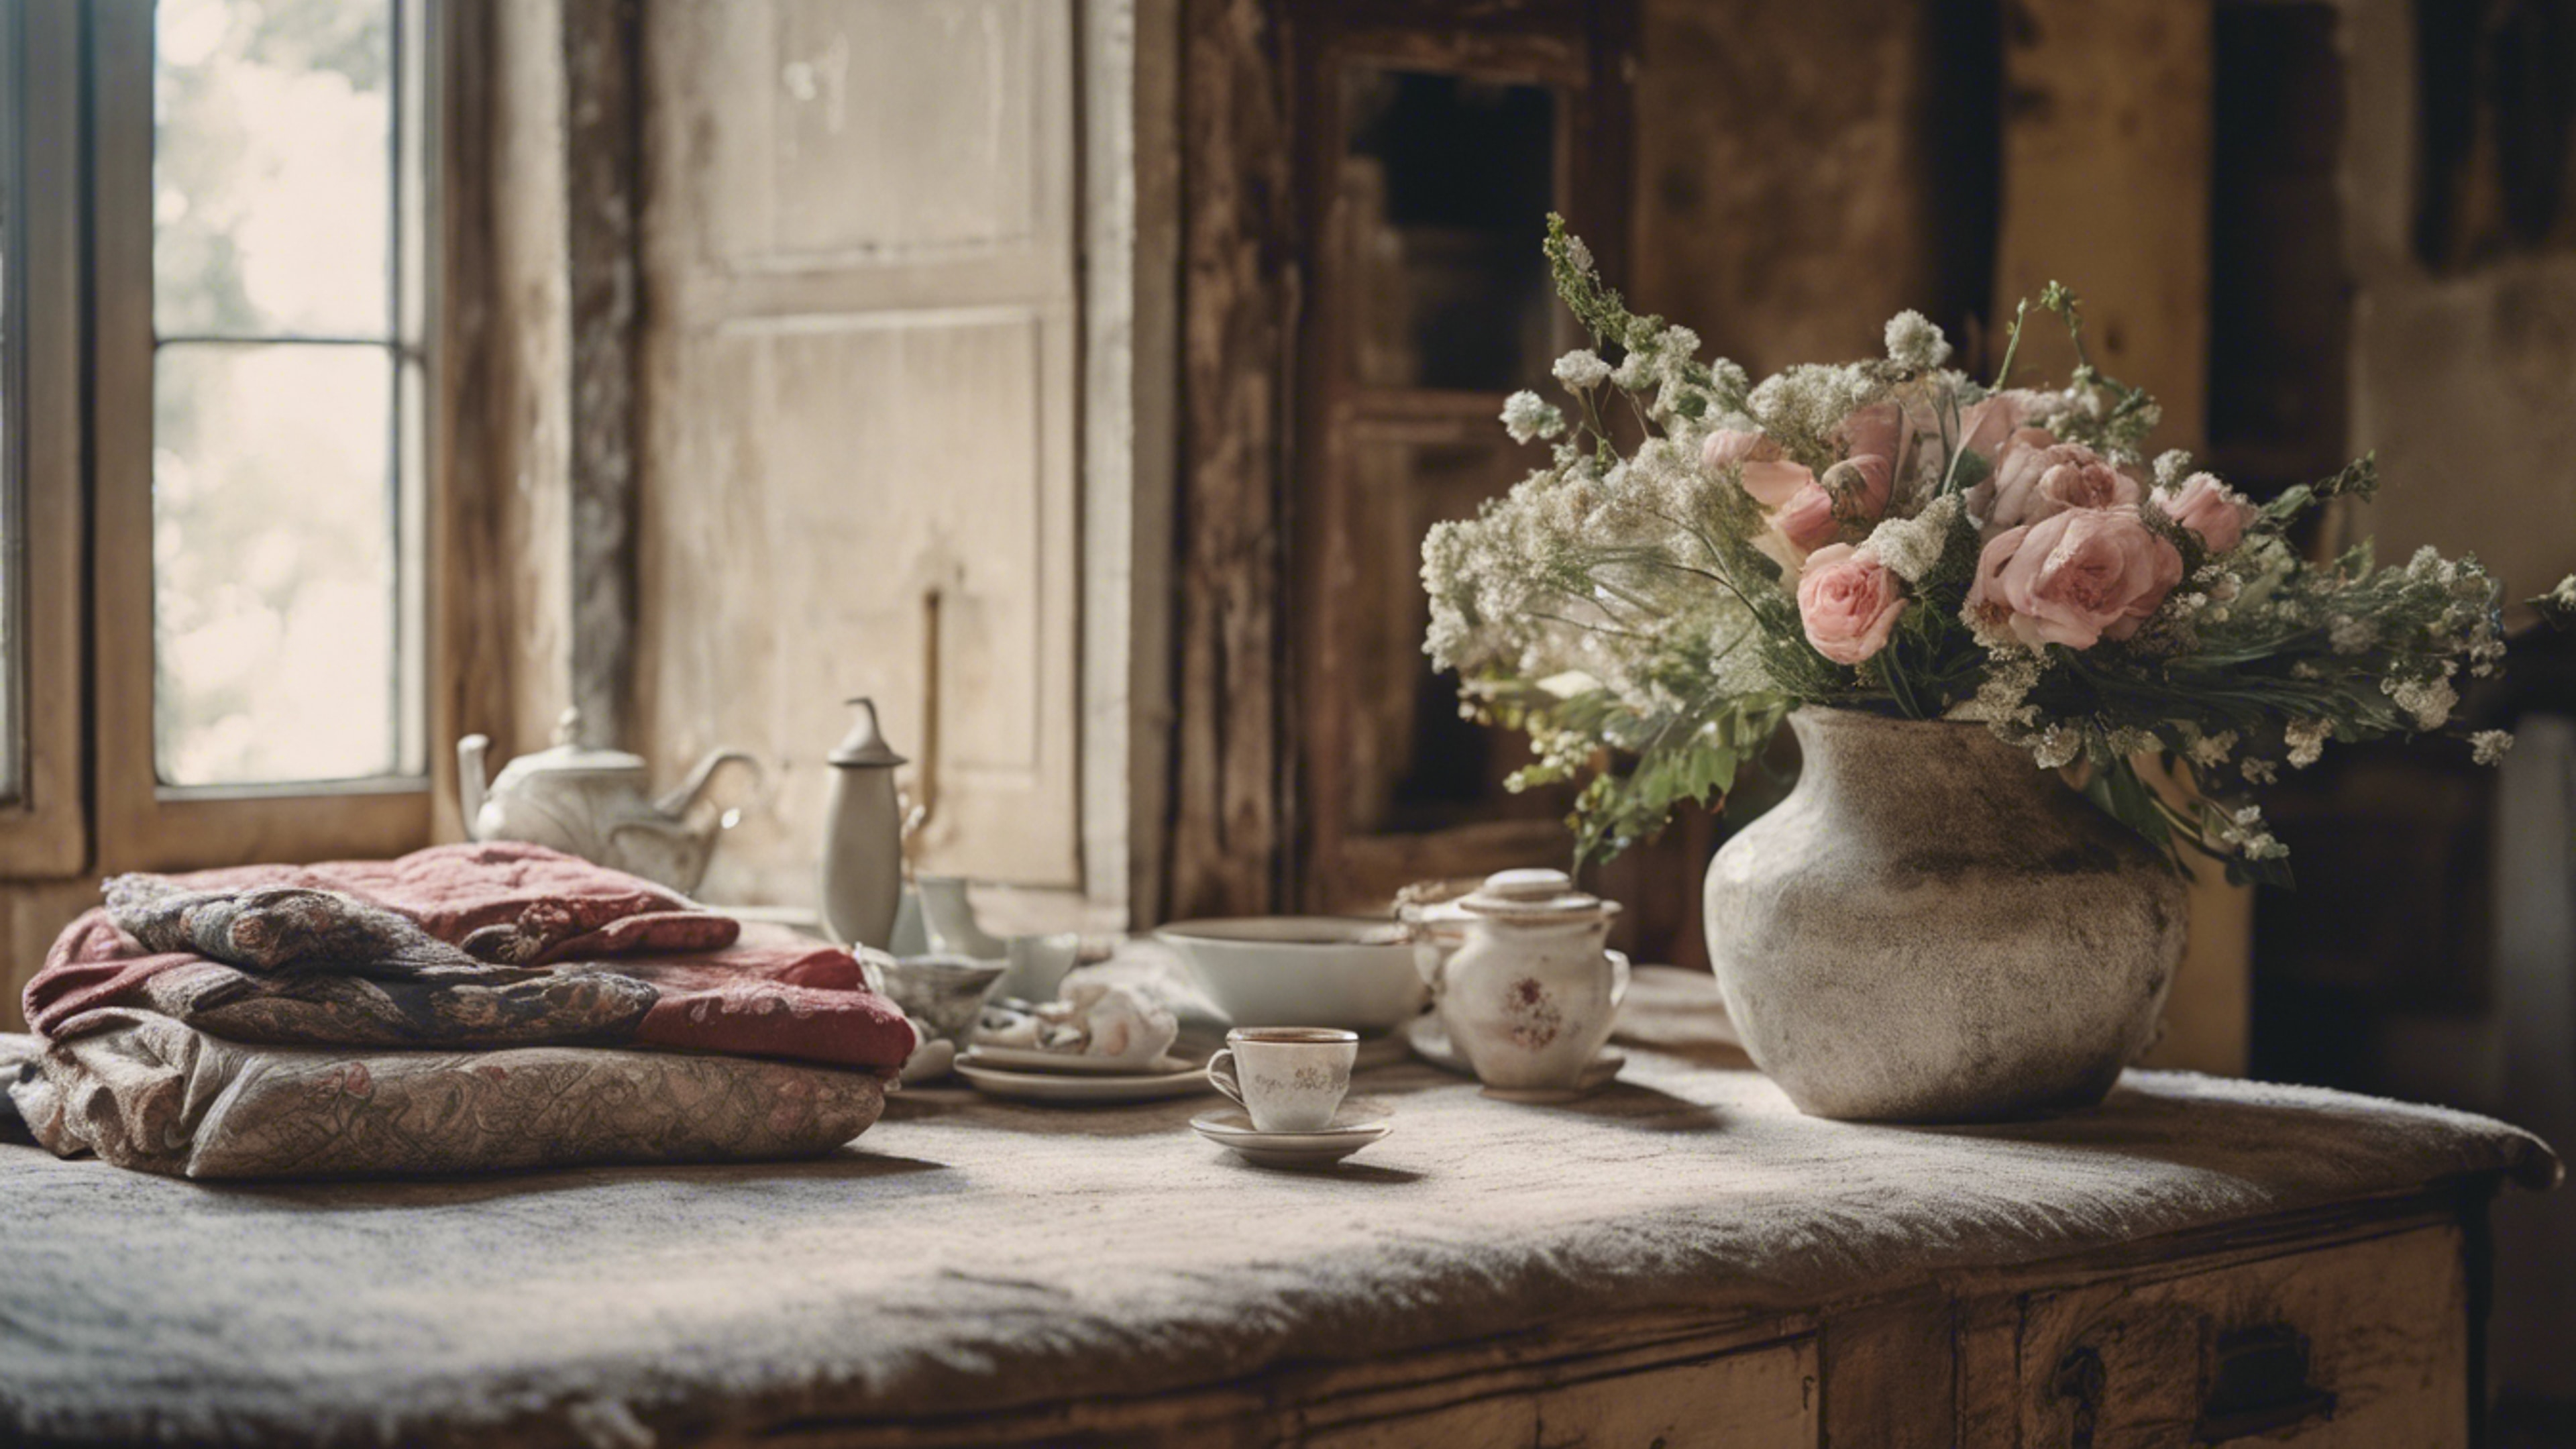 Vintage French country home interiors, full of hand-stitched textiles, distressed furniture, and fresh flowers. Kertas dinding[3ce768b1b5e34f149bef]